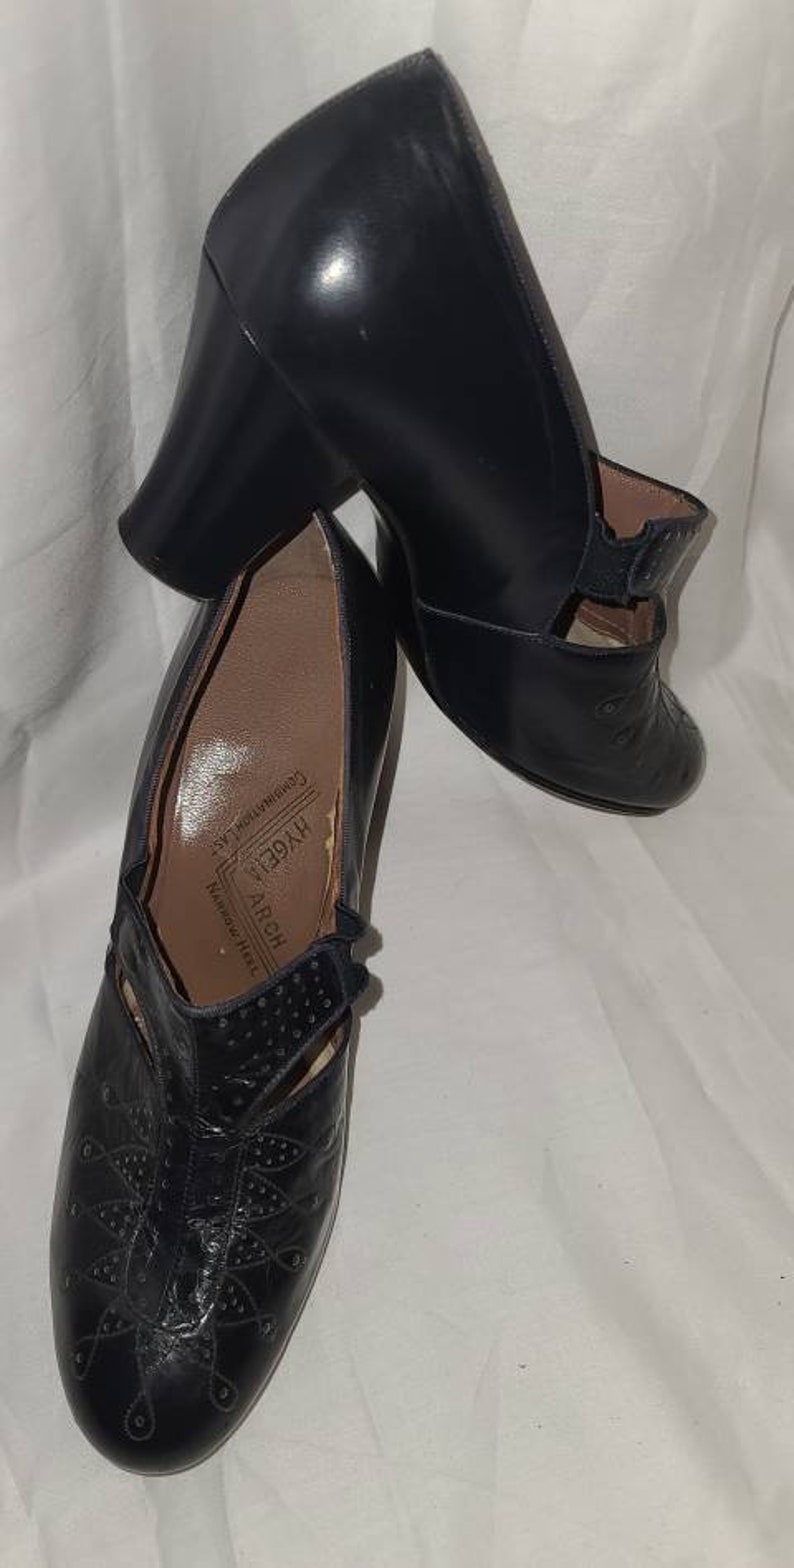 Vintage 1930s Shoes Very Dark Navy Blue Leather Pumps Mary | Etsy